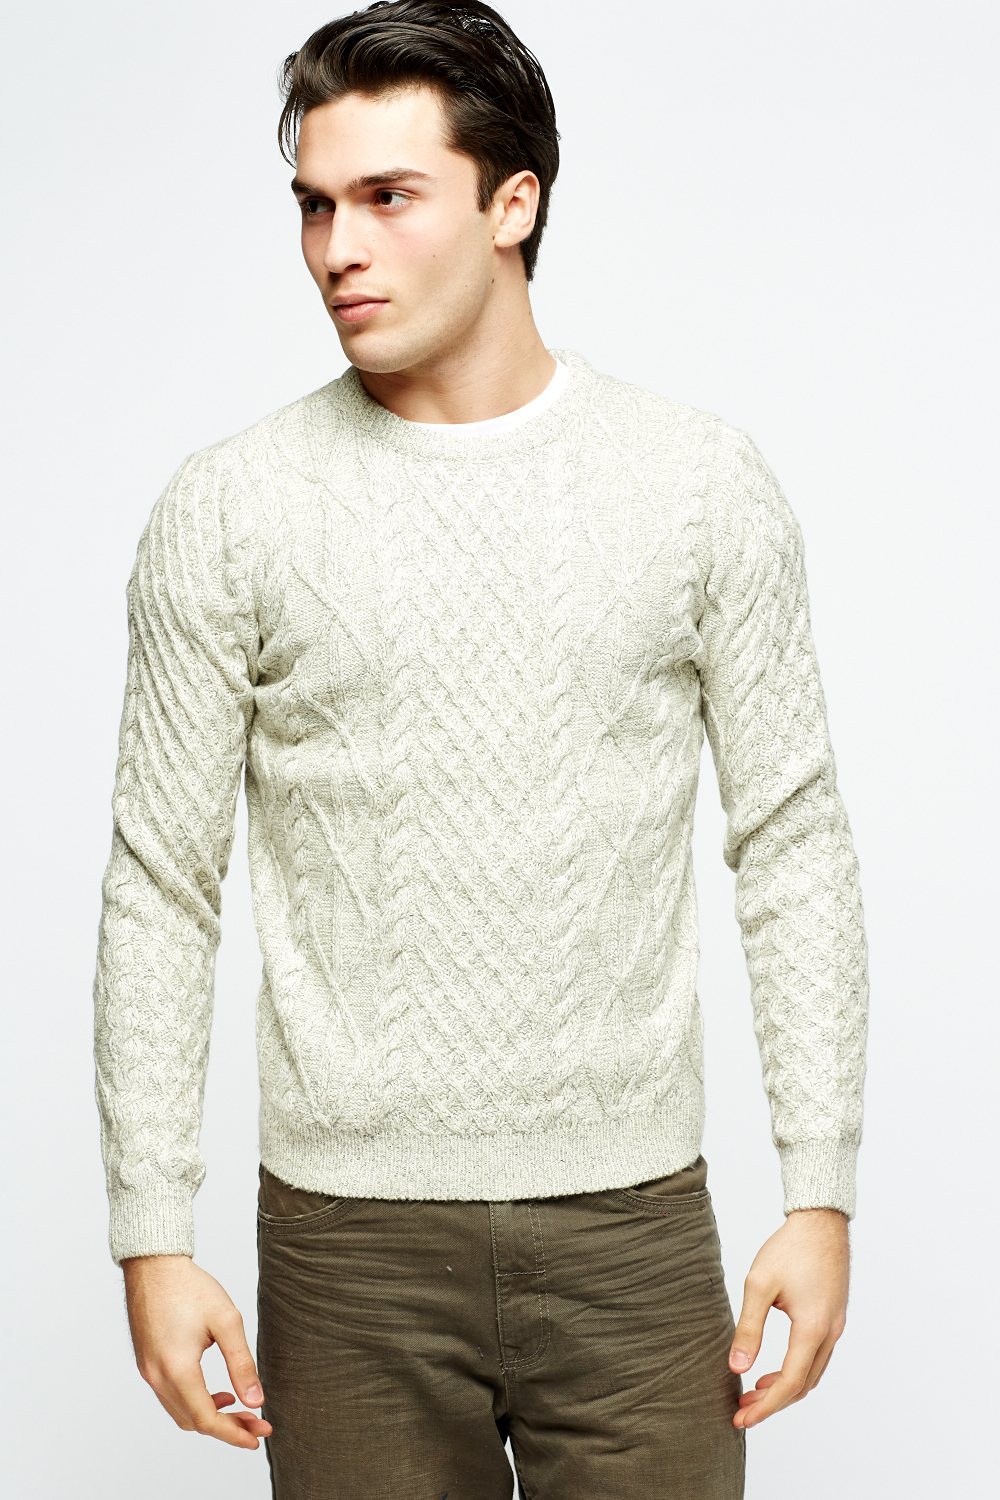 Free Knitting Patterns For Men's Sweaters 7 Free Knitting Patterns For Men Every Guy Will Love Interweave